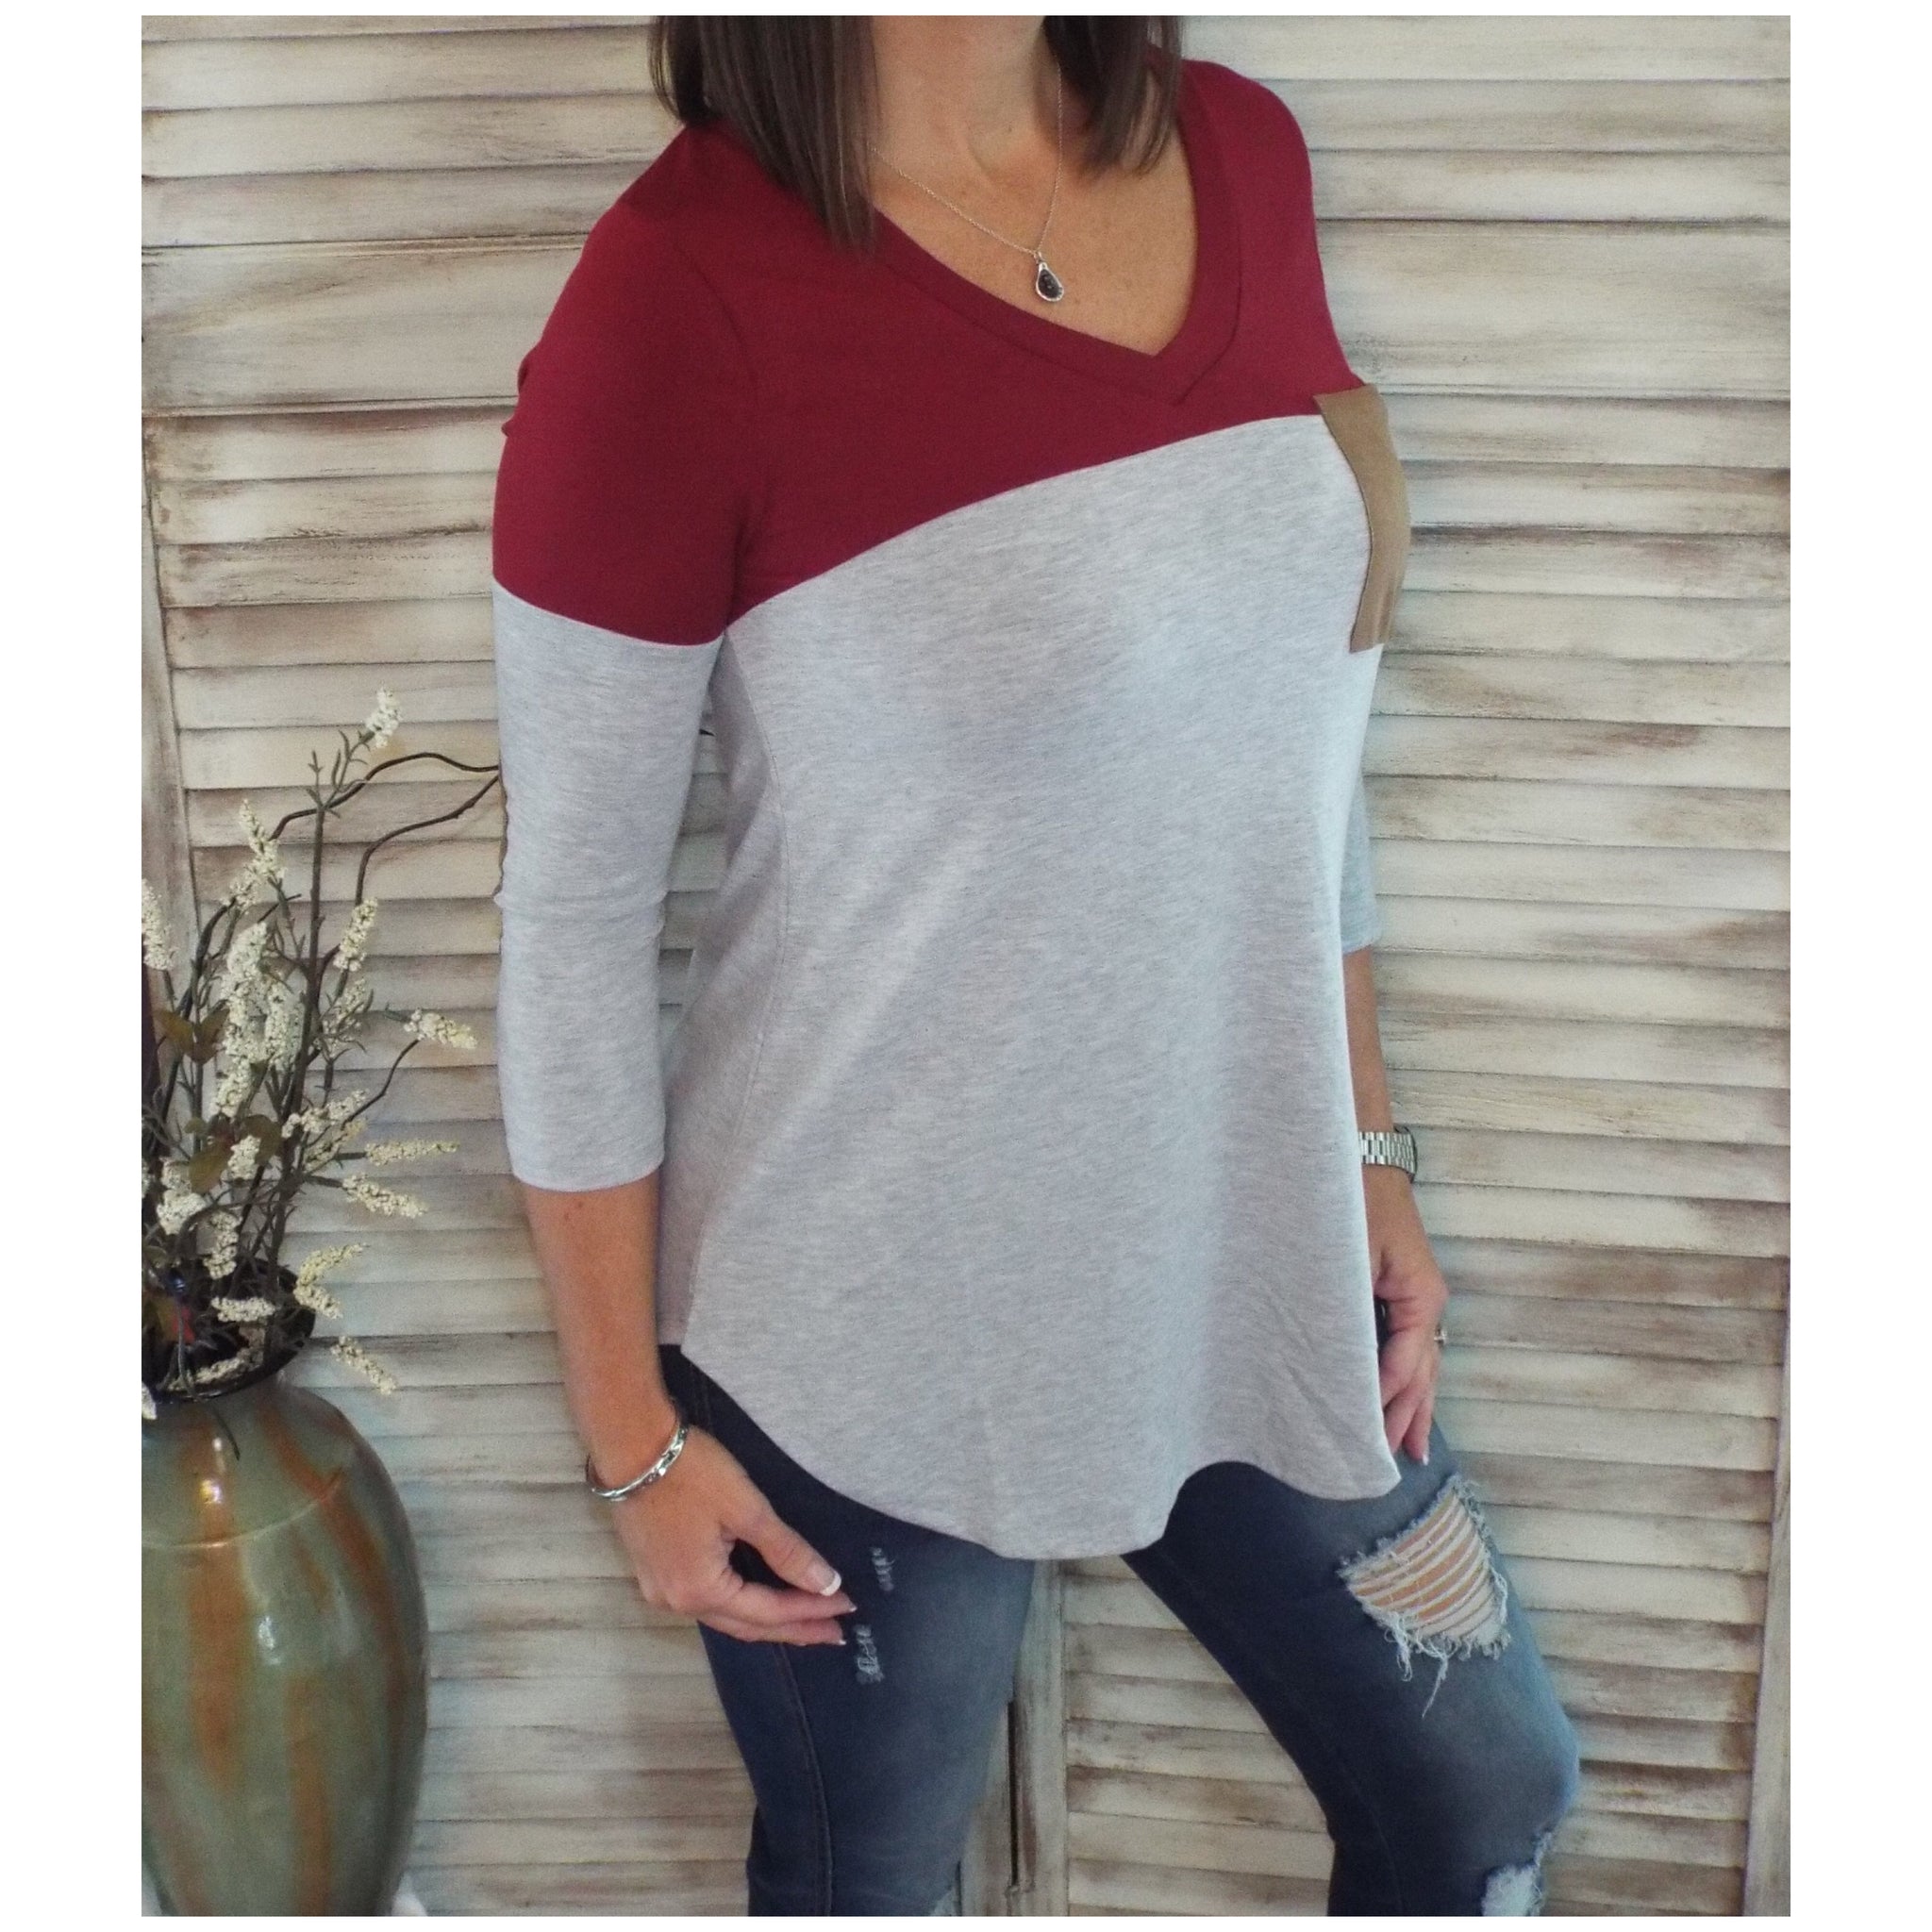 Suede Pocket Elbow Detail V-Neck Floaty Tunic 3/4 Sleeve Wine Gray S/M/L/XL